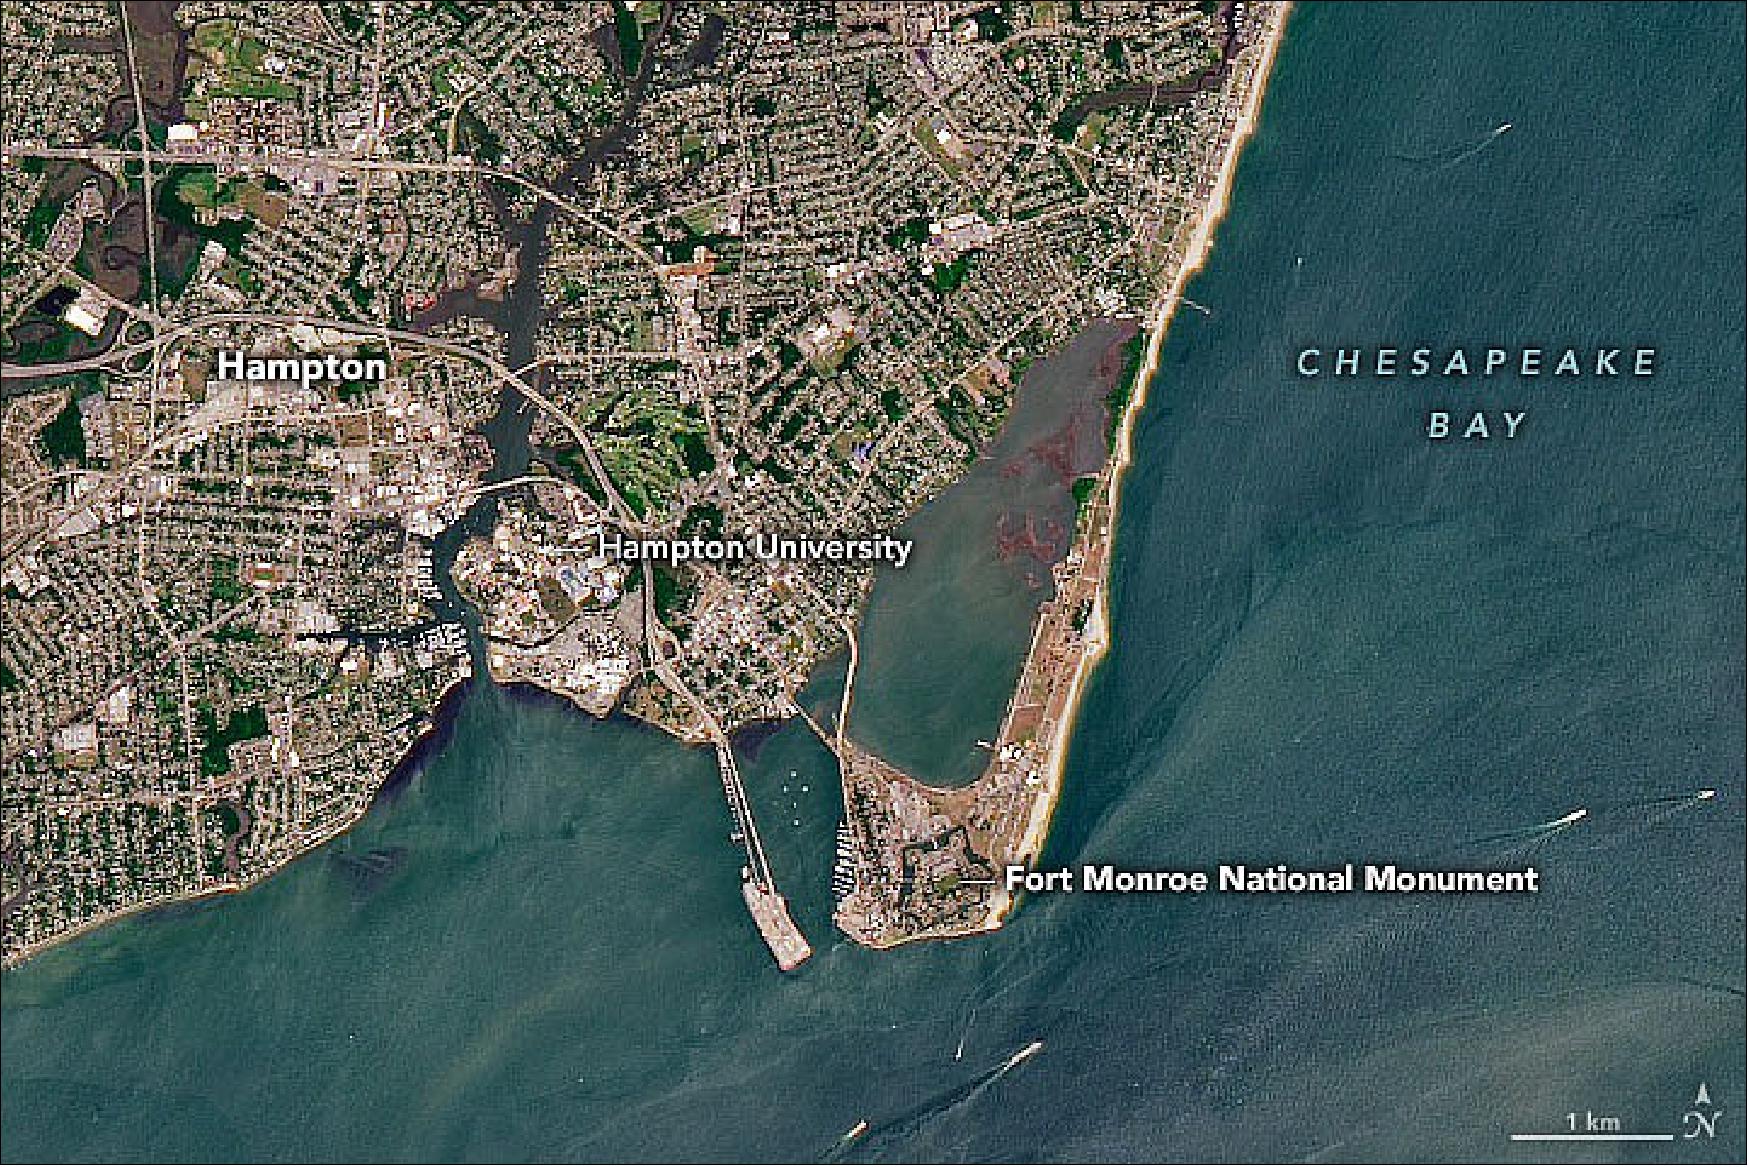 Figure 29: The OLI instrument on Landsat-8 acquired this natural-color image of Old Point Comfort on June 10, 2022. When the first landing of Africans occurred in Virginia, the peninsula was home to the small, wooden Fort Algernourne. Fort Monroe, a larger stone fortress built during the War of 1812, now occupies the spot. Parts of the moat around the hexagonal fort are visible in the Landsat image, as well as several of the six bastions. (image credit: NASA Earth Observatory image by Joshua Stevens, using Landsat data from the U.S. Geological Survey. Story by Adam Voiland)